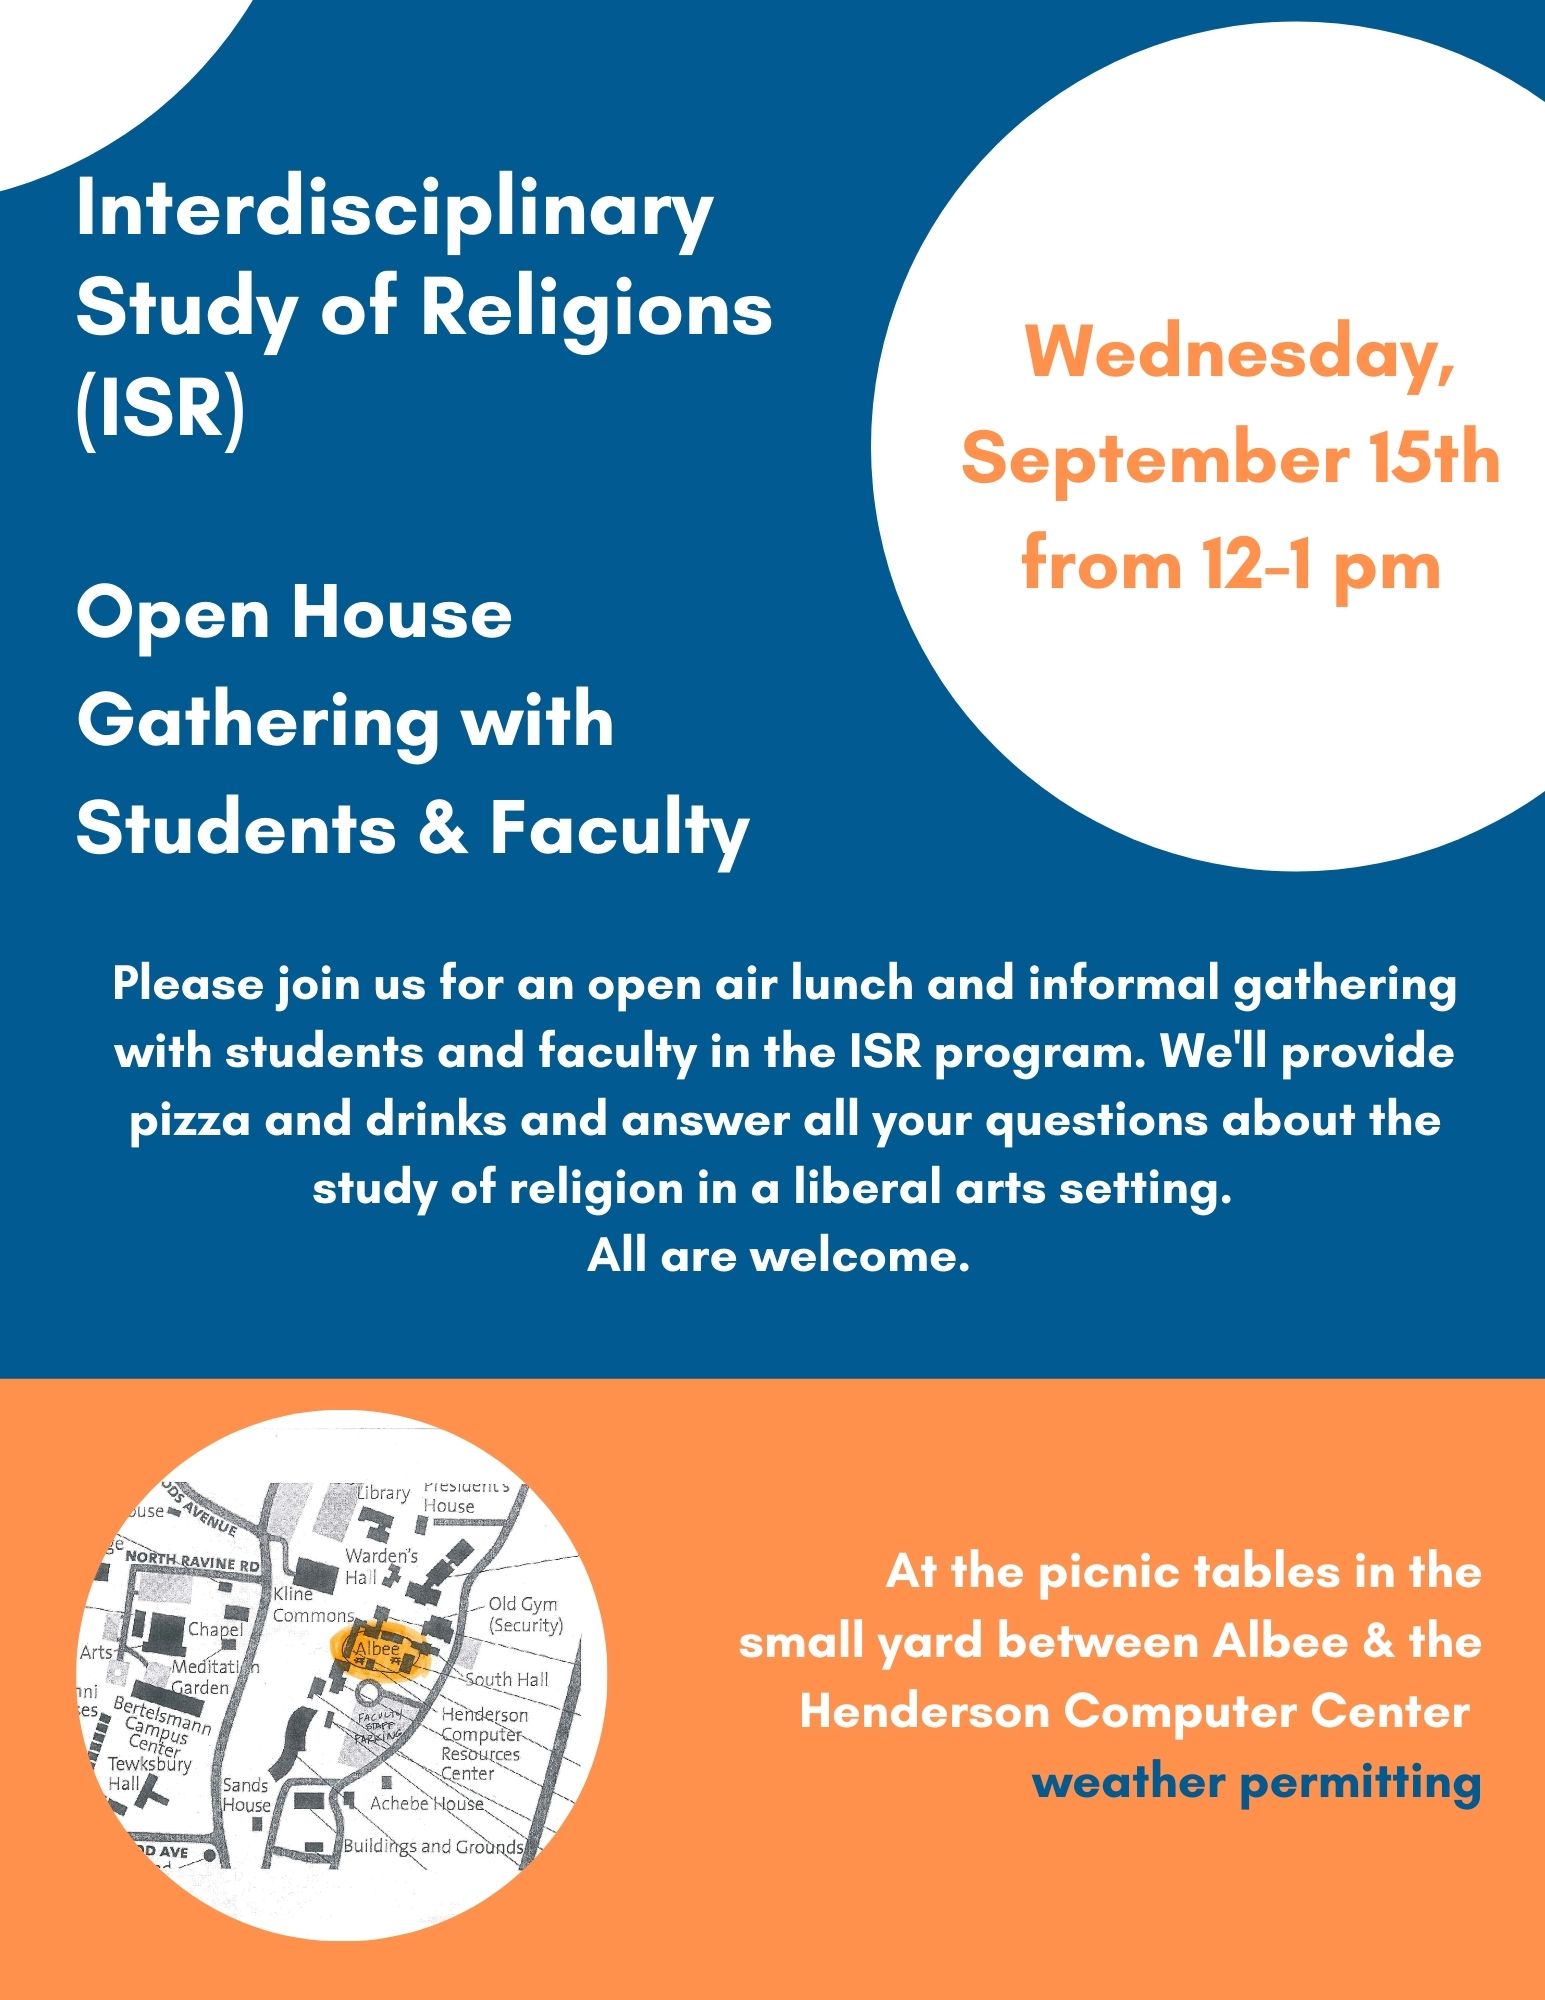 Open House Gathering with Students and Faculty in the Interdisciplinary Study of Religions (ISR)&nbsp;